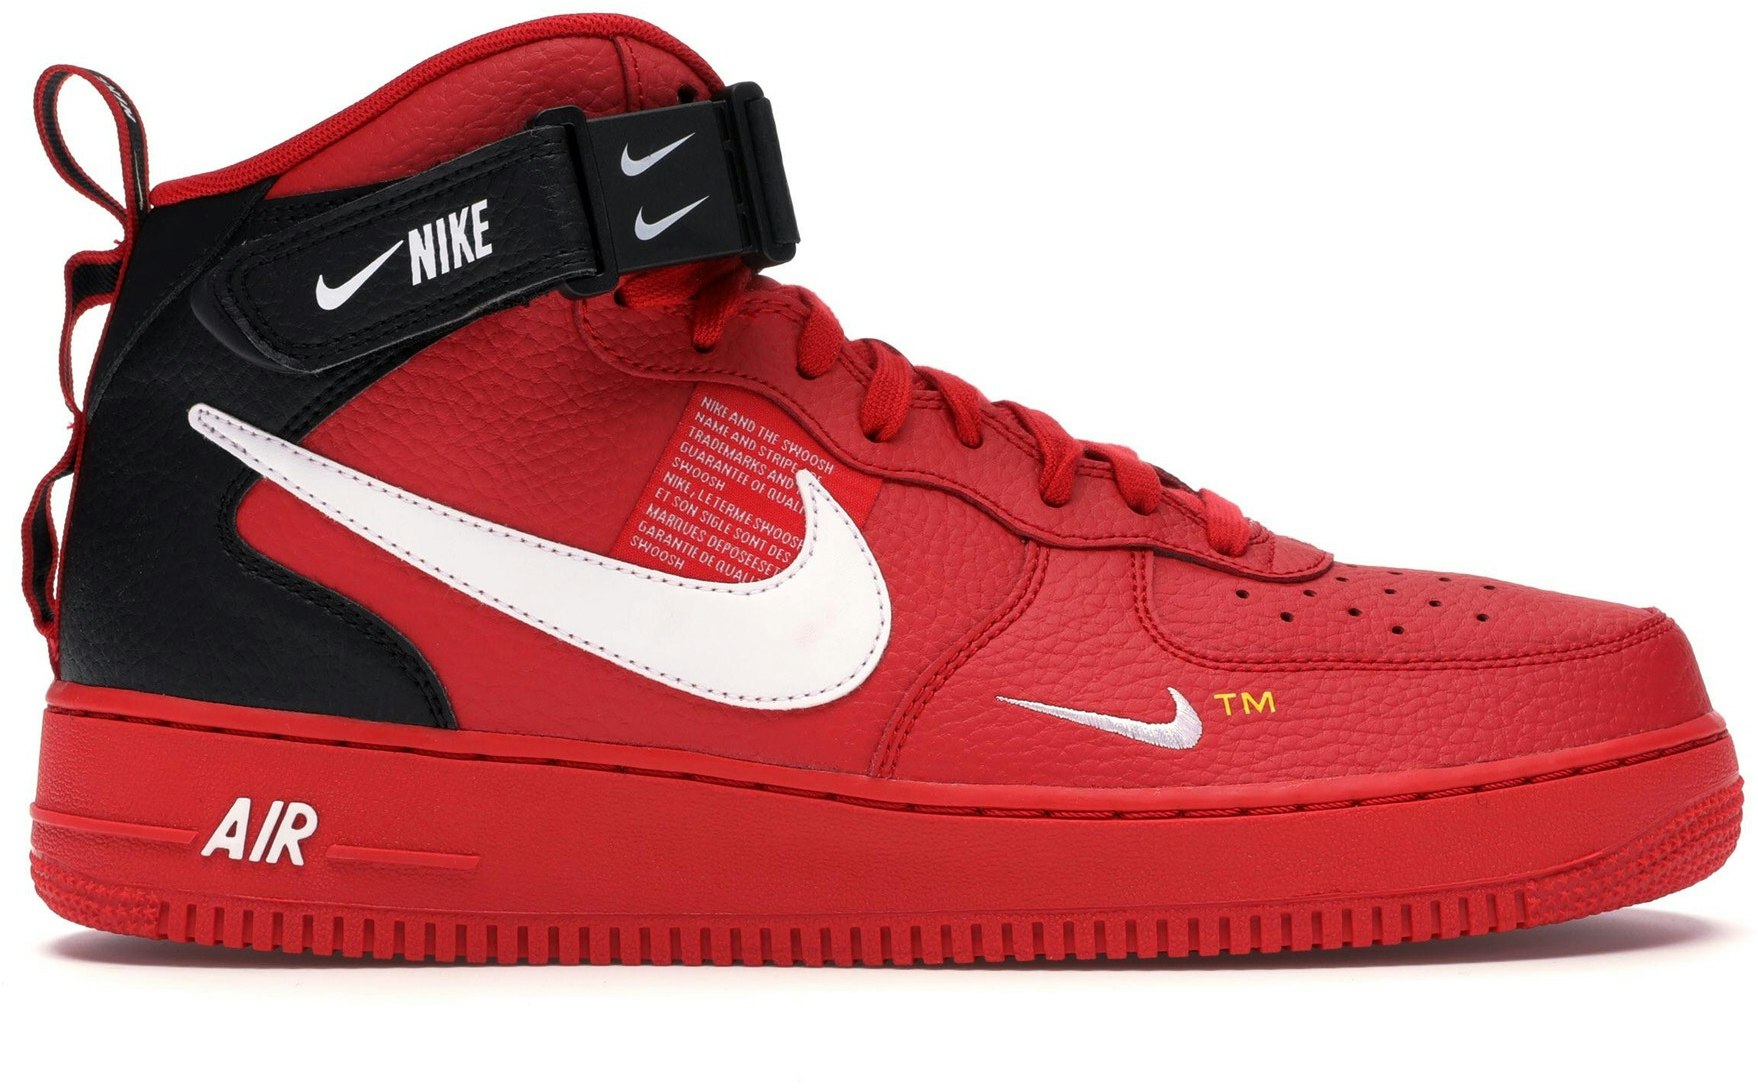 Nike Air Force 1 Mid Utility University Red 804609-605 - 804609-605 ...